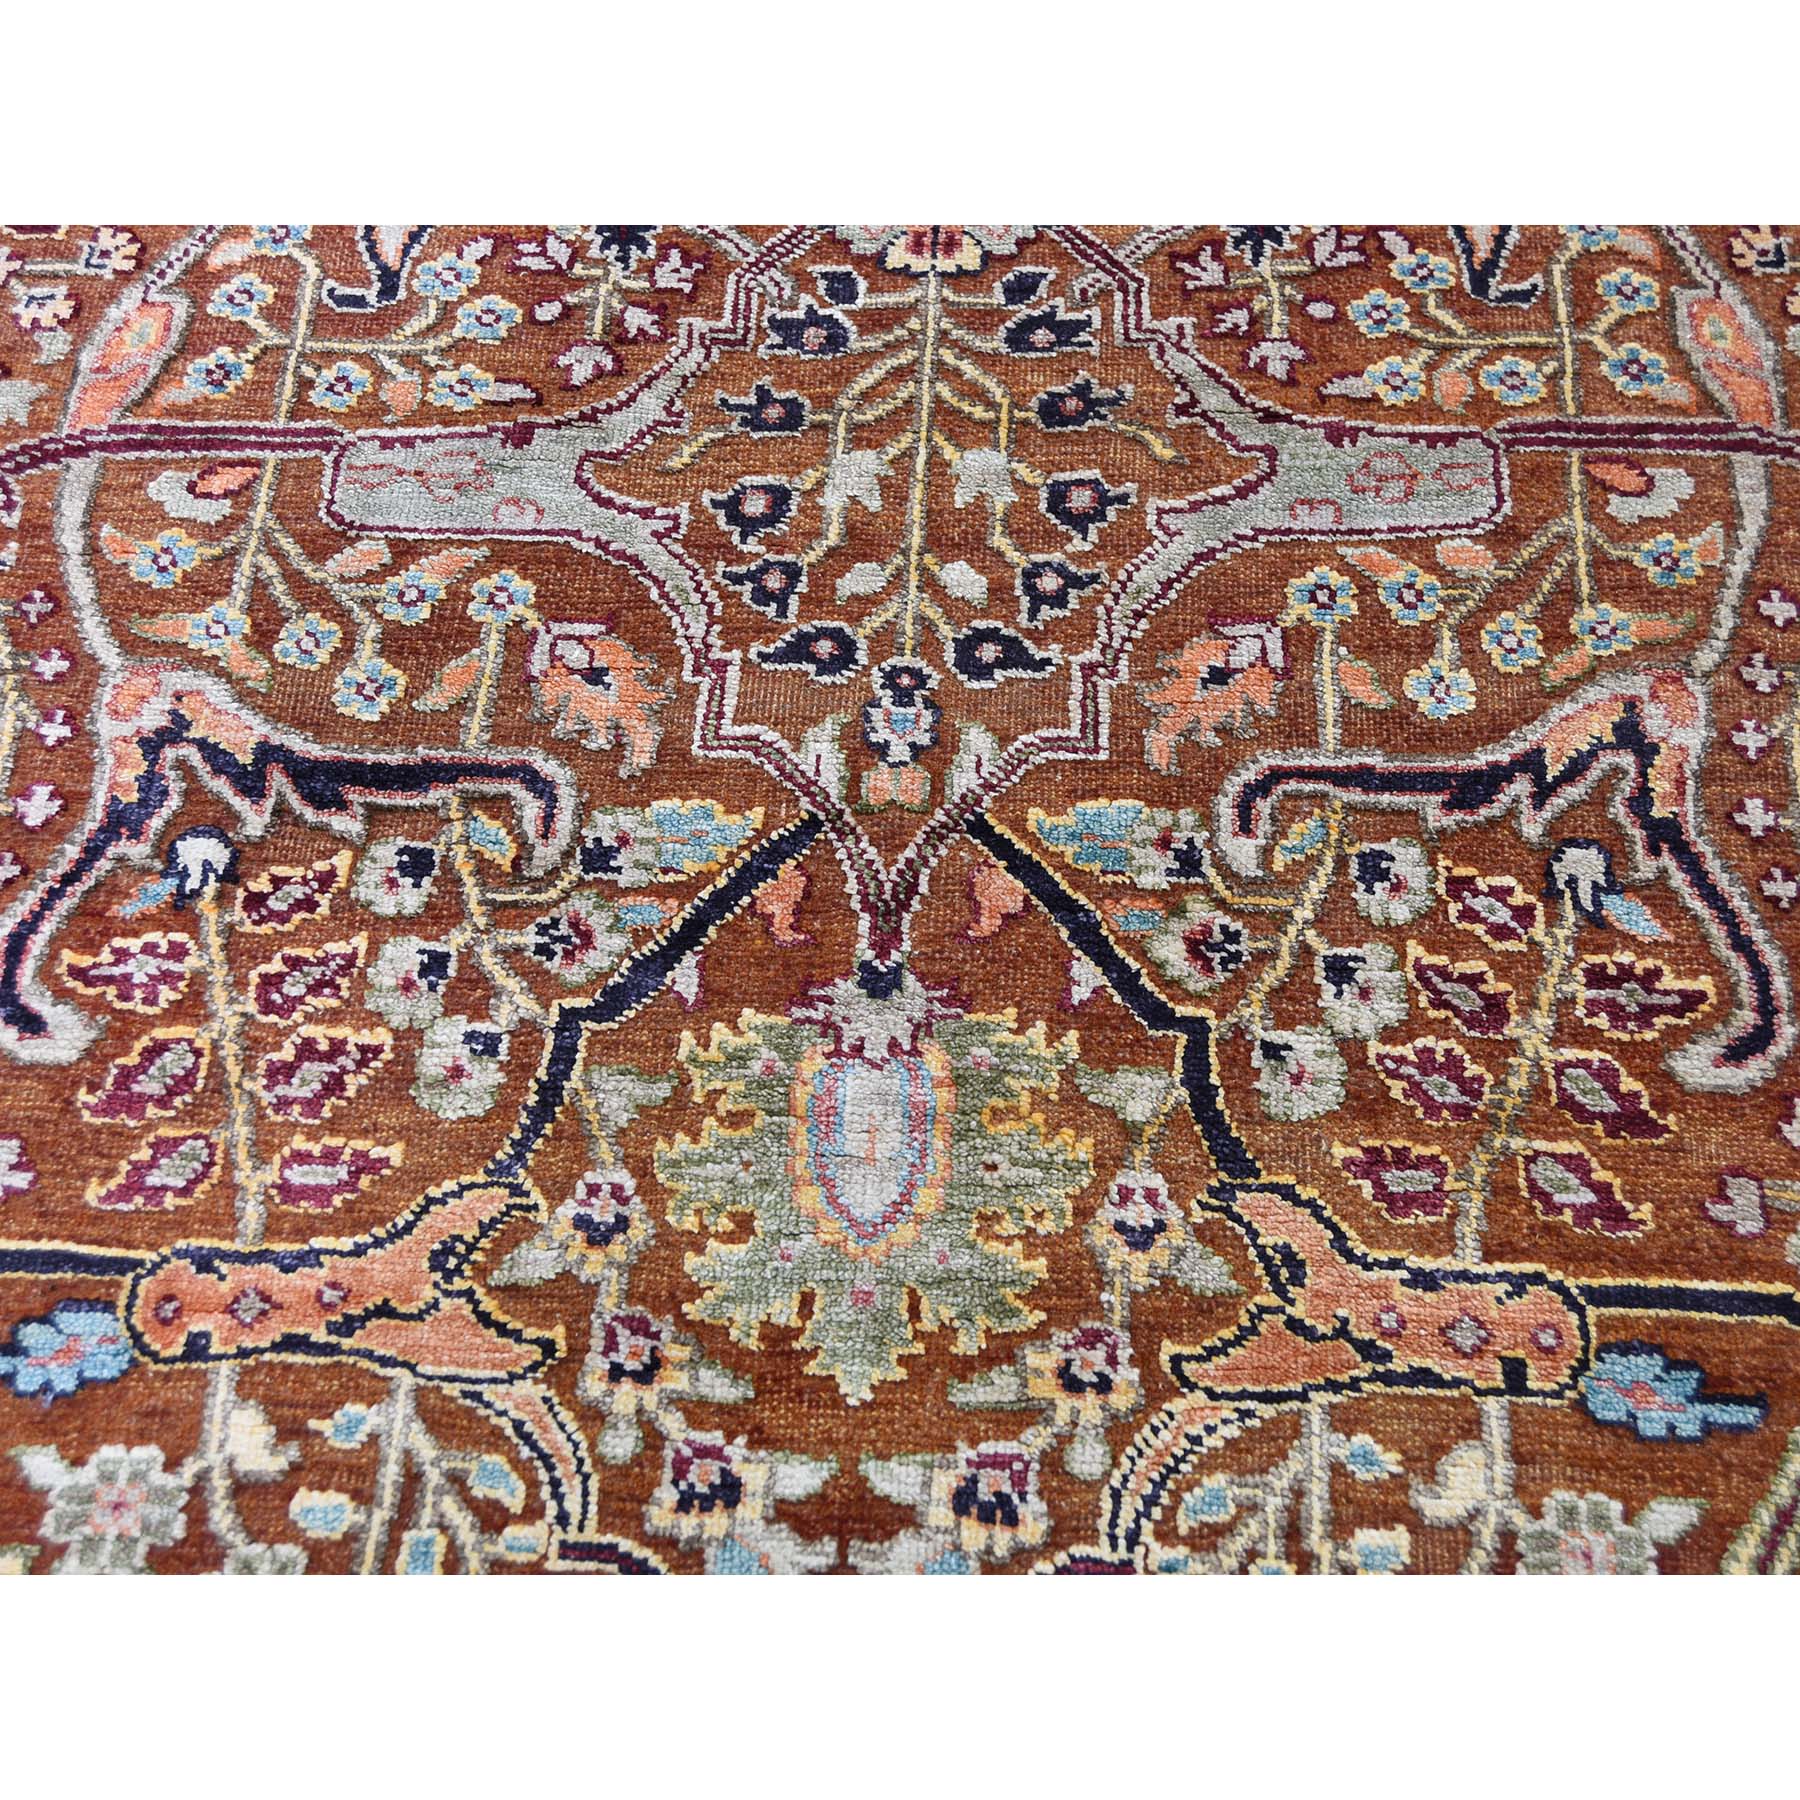 8-10 x12-4  Oushak Design Silk WIth Textured Wool Hand-Knotted Oriental Rug 